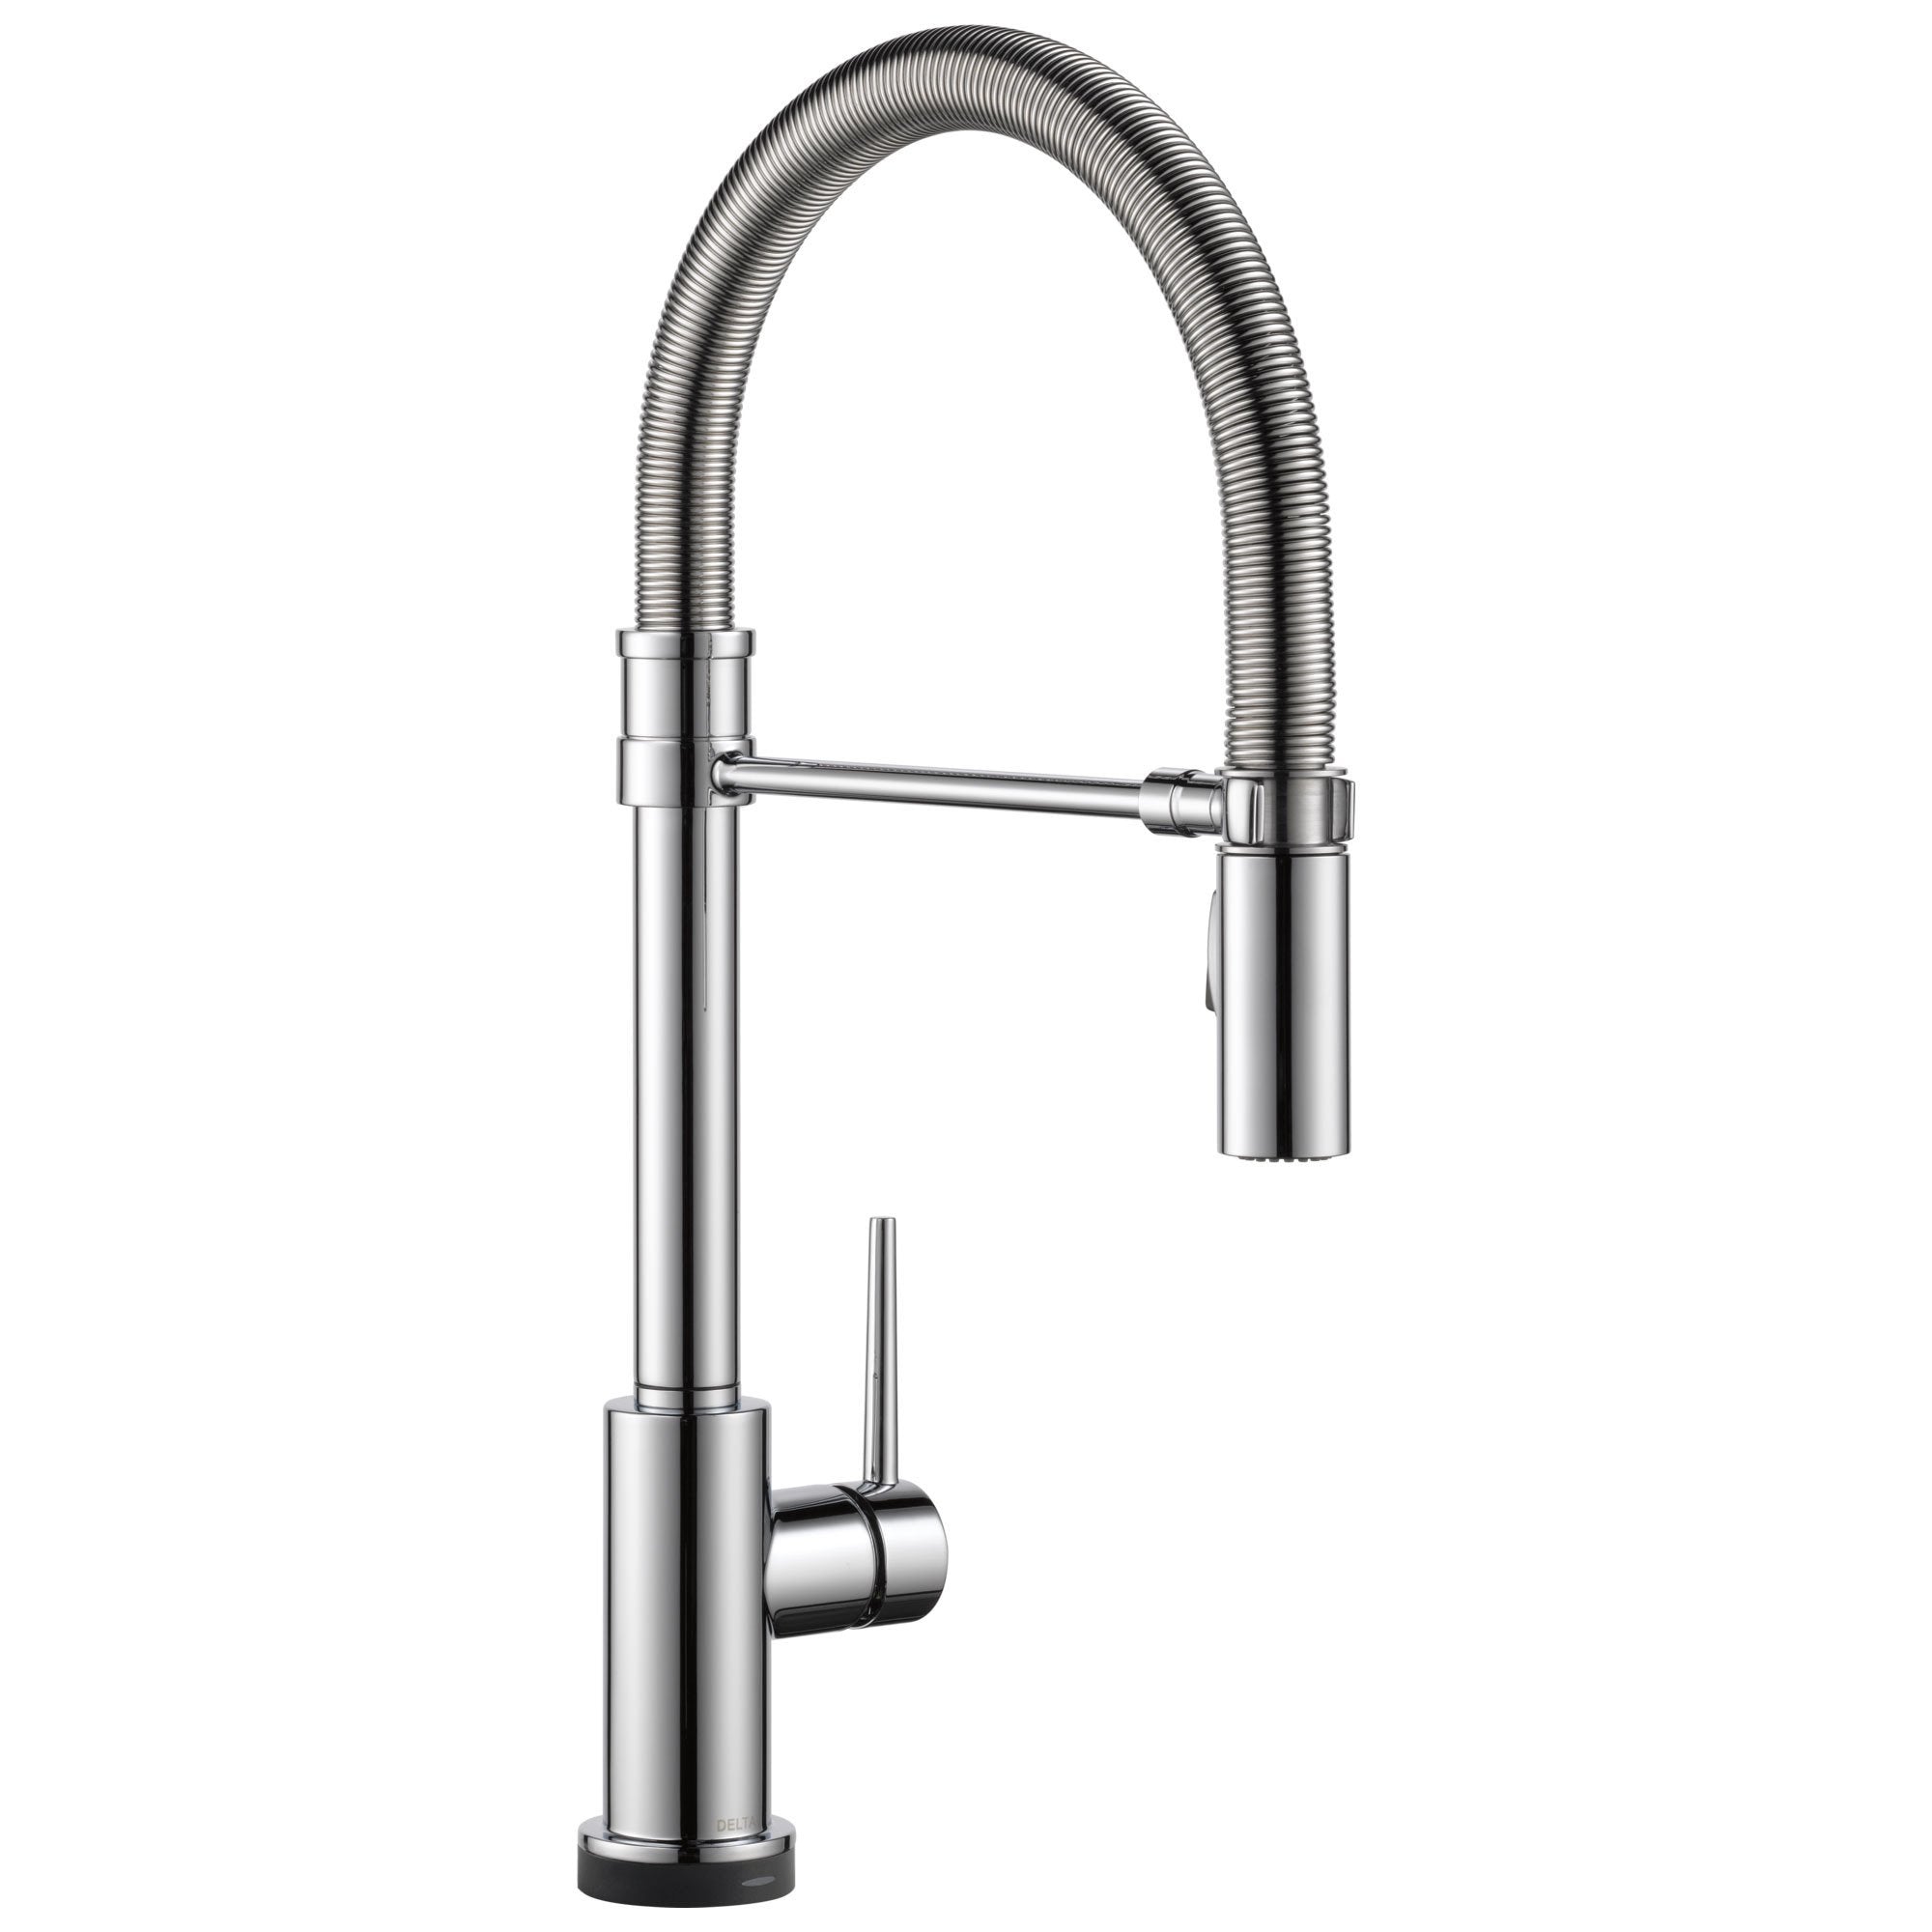 Delta Trinsic Collection Chrome Finish Single Handle Pull-Down Spring Spout Electronic Kitchen Sink Faucet with Touch2O Technology 739277